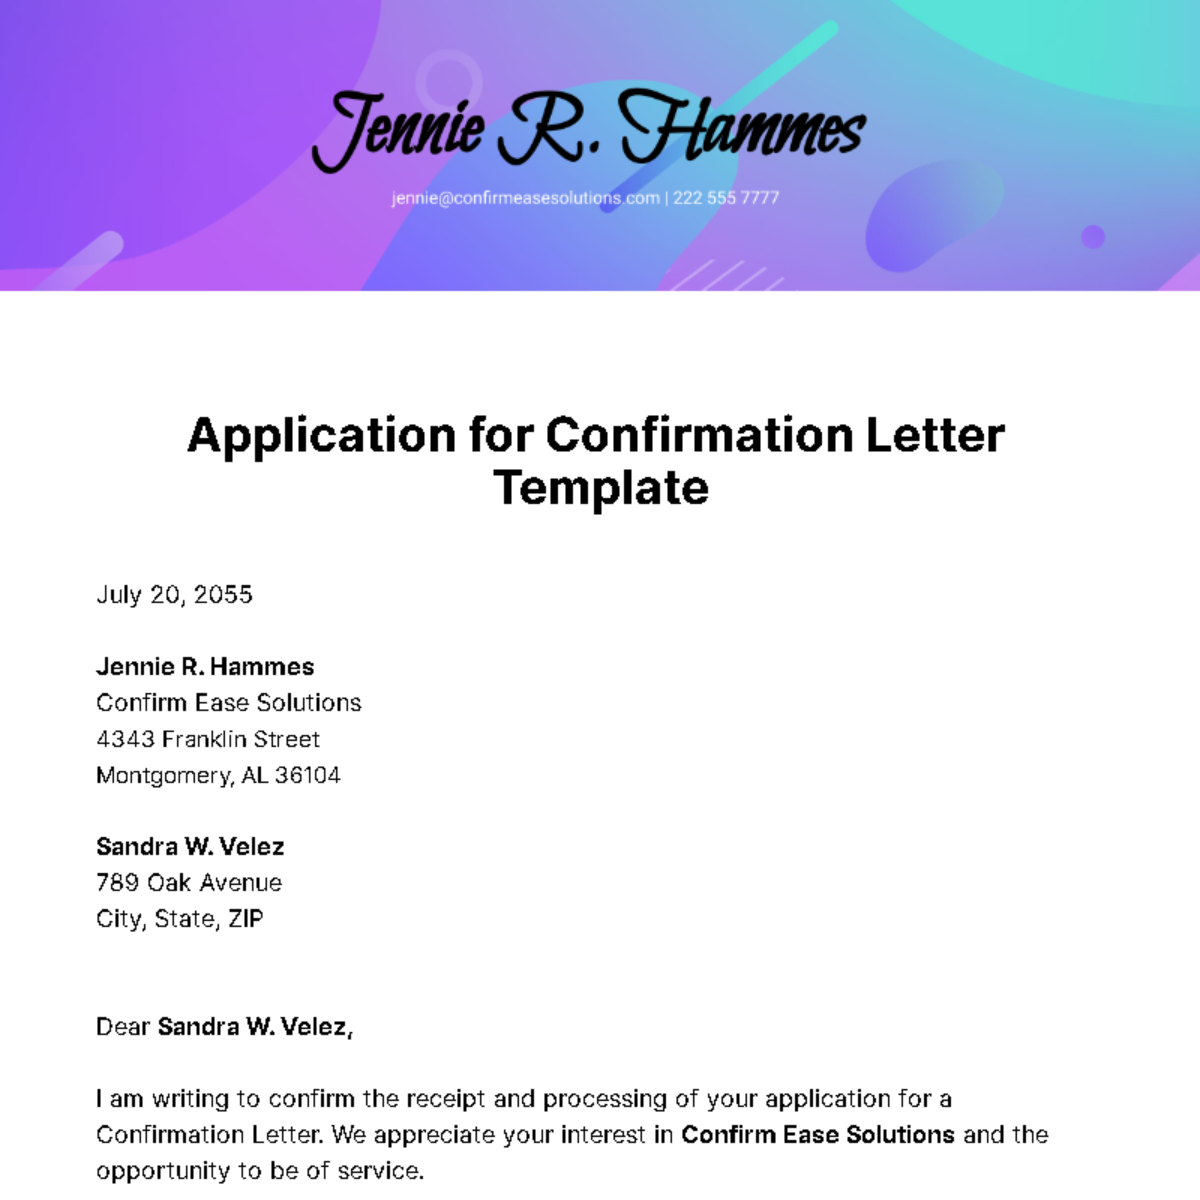 Application for Confirmation Letter Template